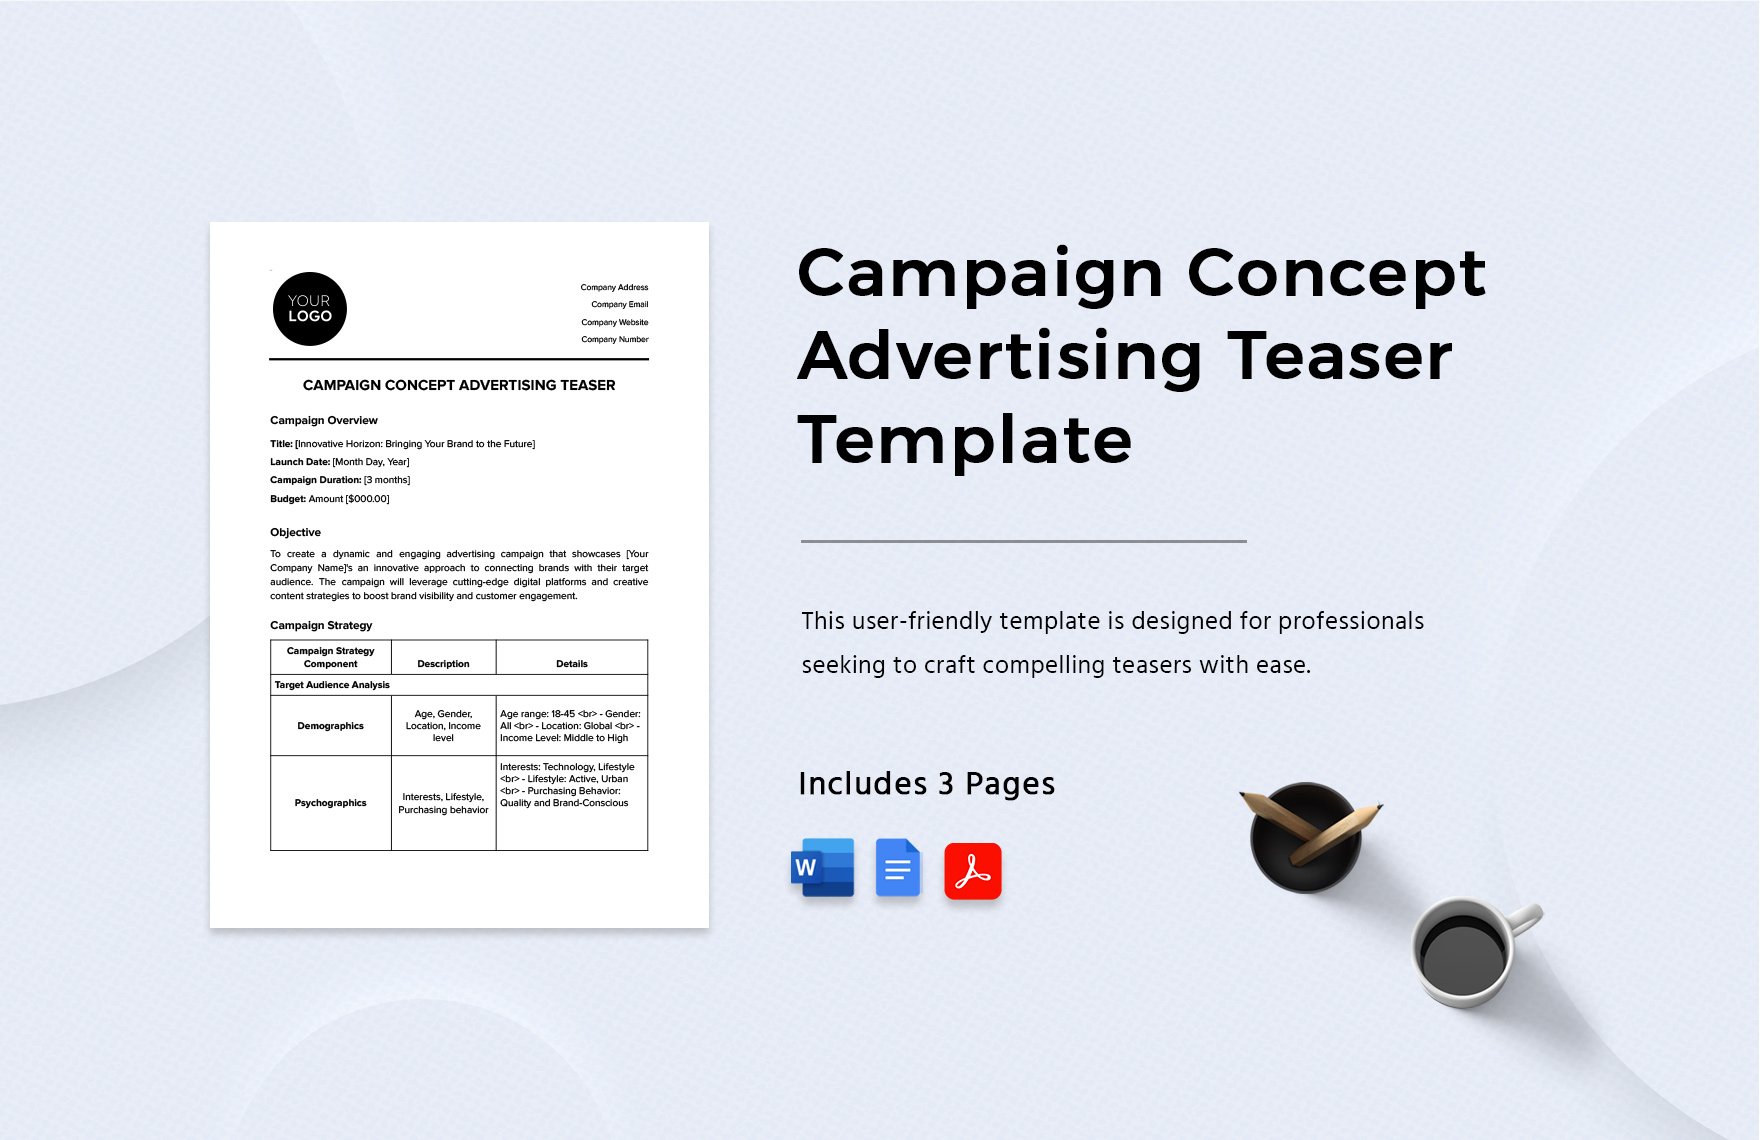 Campaign Concept Advertising Teaser Template